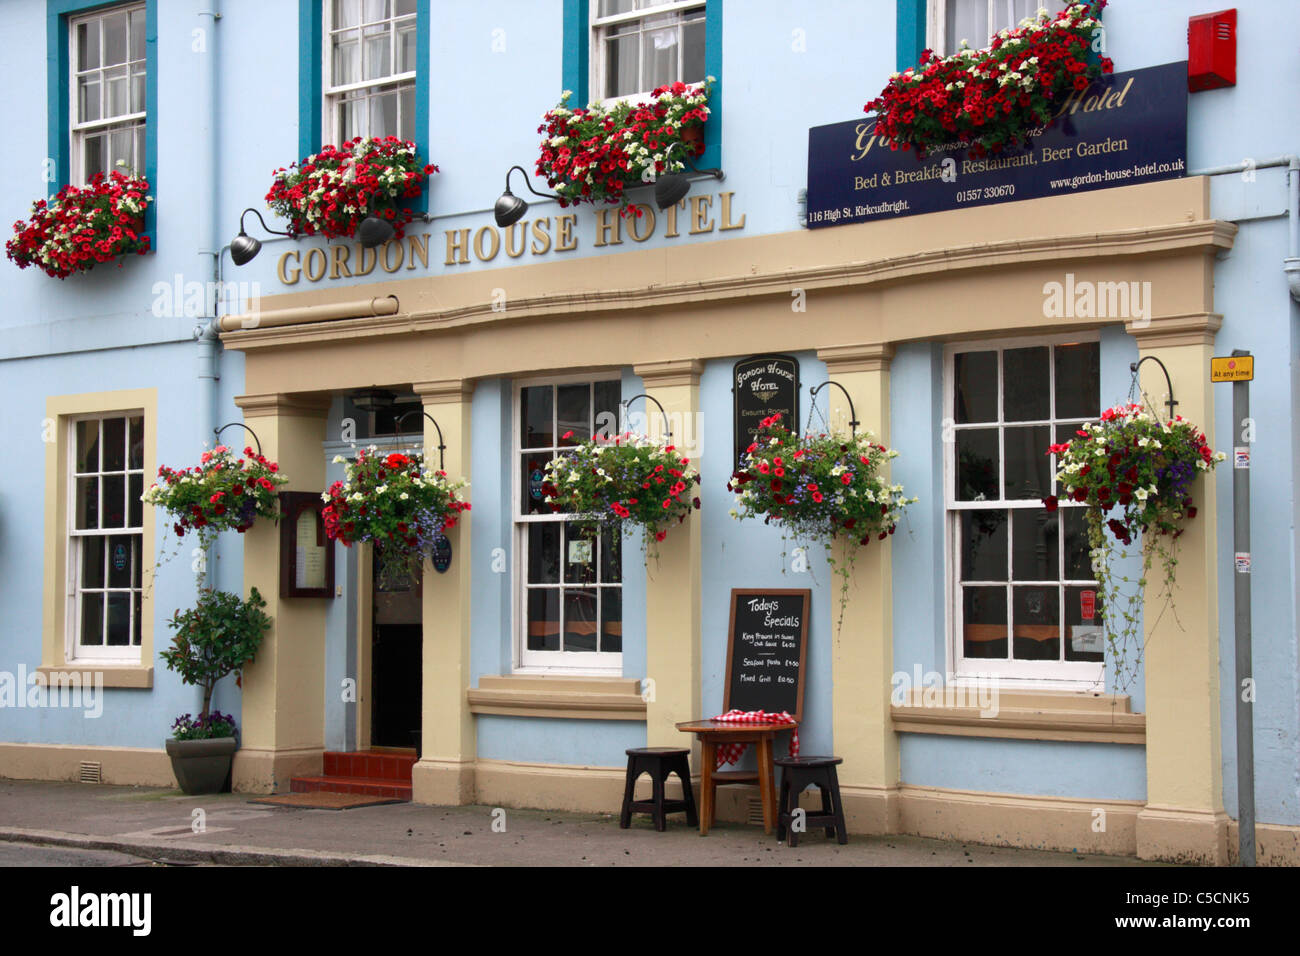 Gordon House Hotel in Kirkcudbright, Dumfries and Galloway, Scotland. Stock Photo